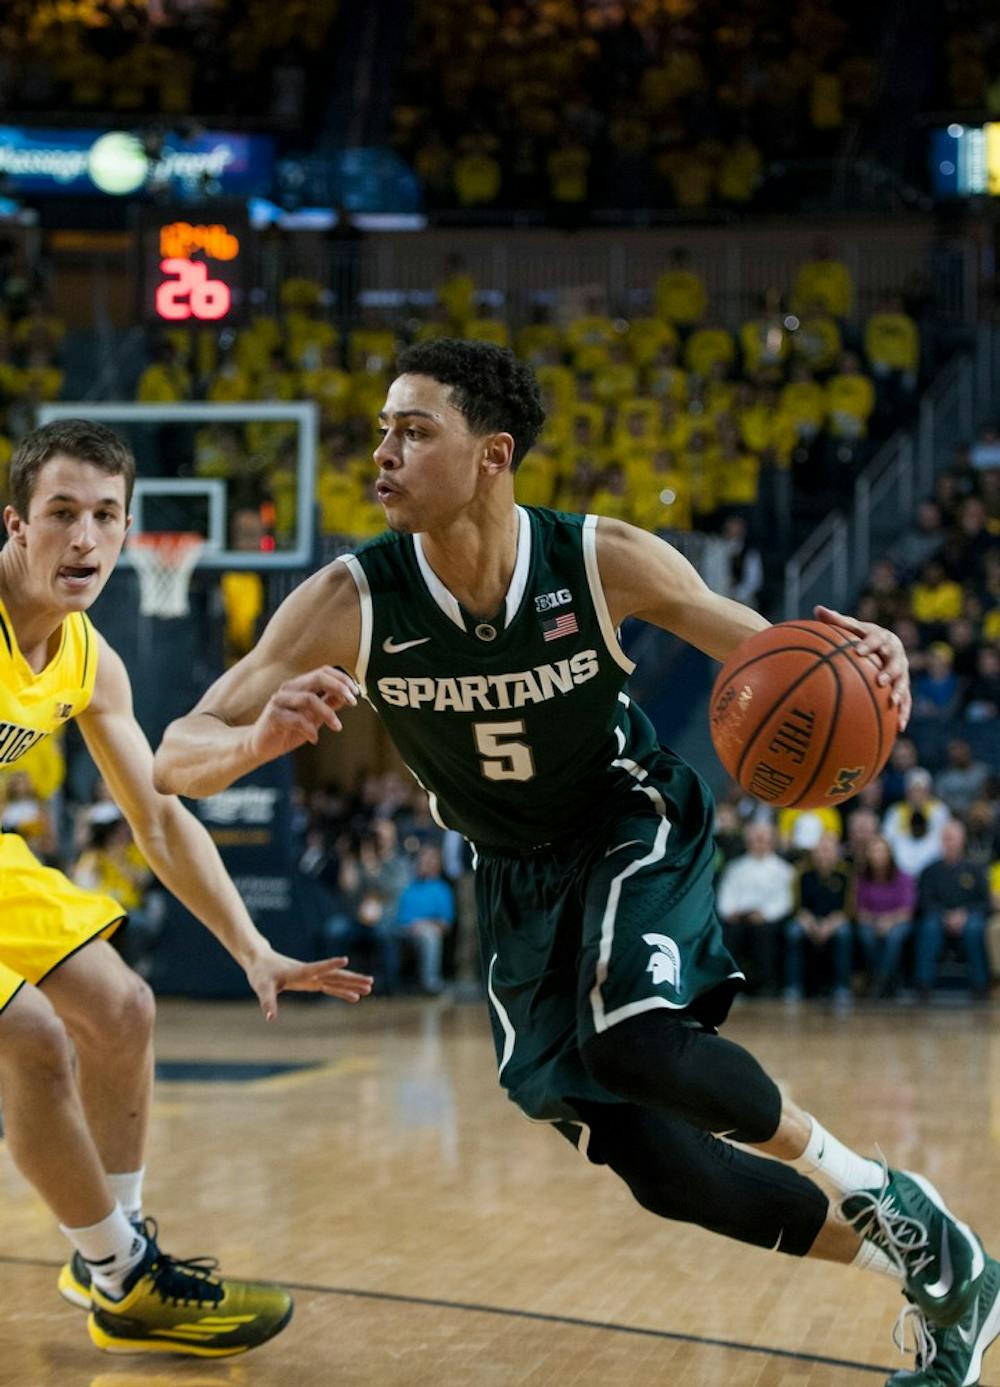 <p>Junior guard Bryn Forbes gets around Michigan guard Andrew Dakich Feb. 17, 2015, during the game against Michigan at Crisler Center in Ann Arbor. The Spartans are leading against the Wolverines at halftime, 38-23. Hannah Levy/The State News</p>